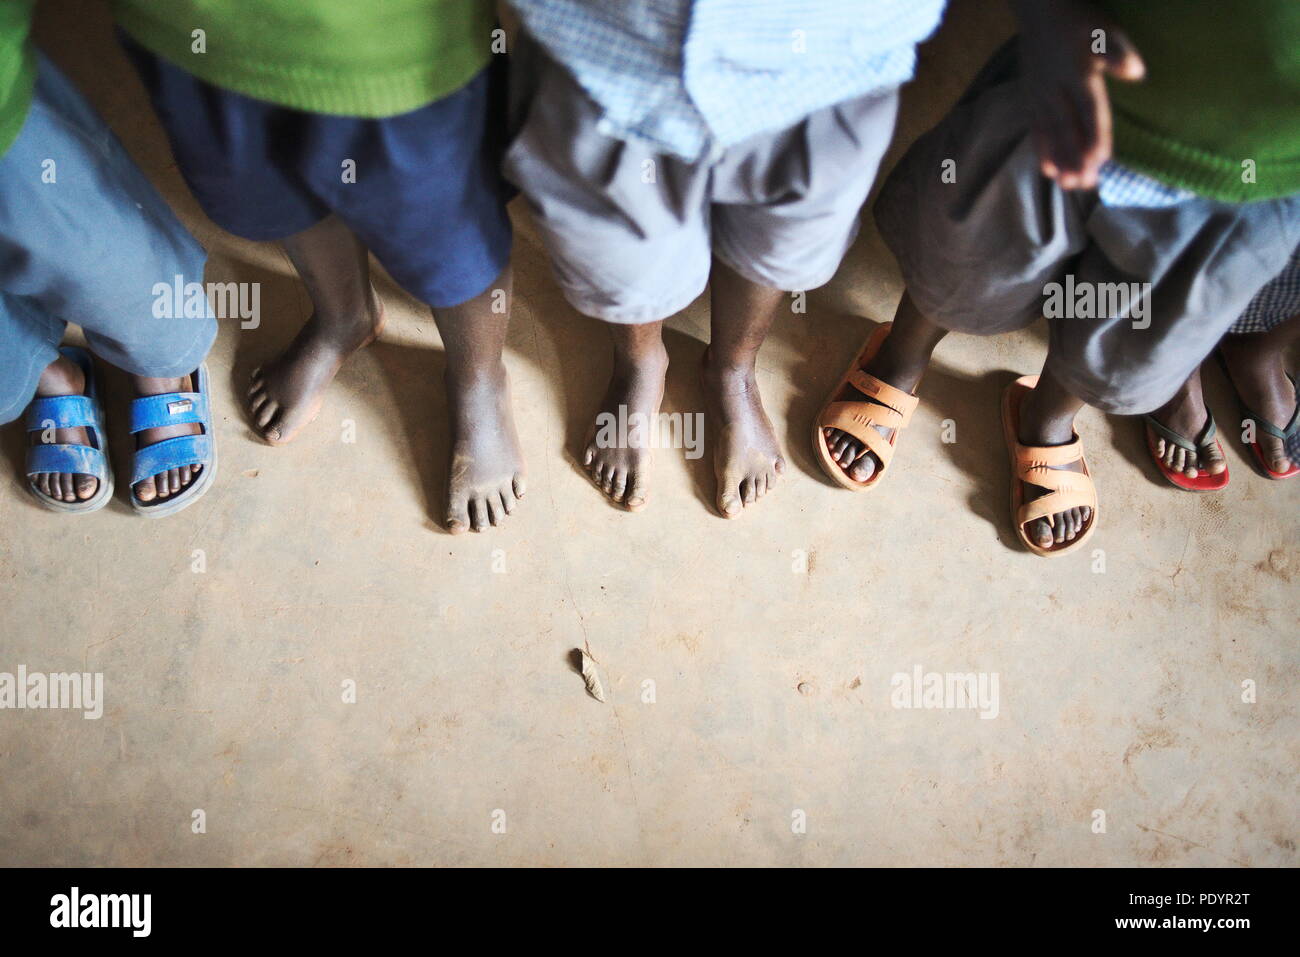 Young Ugandan/African schoolchildren try on used shoes given to the school as a gift from the UK Stock Photo